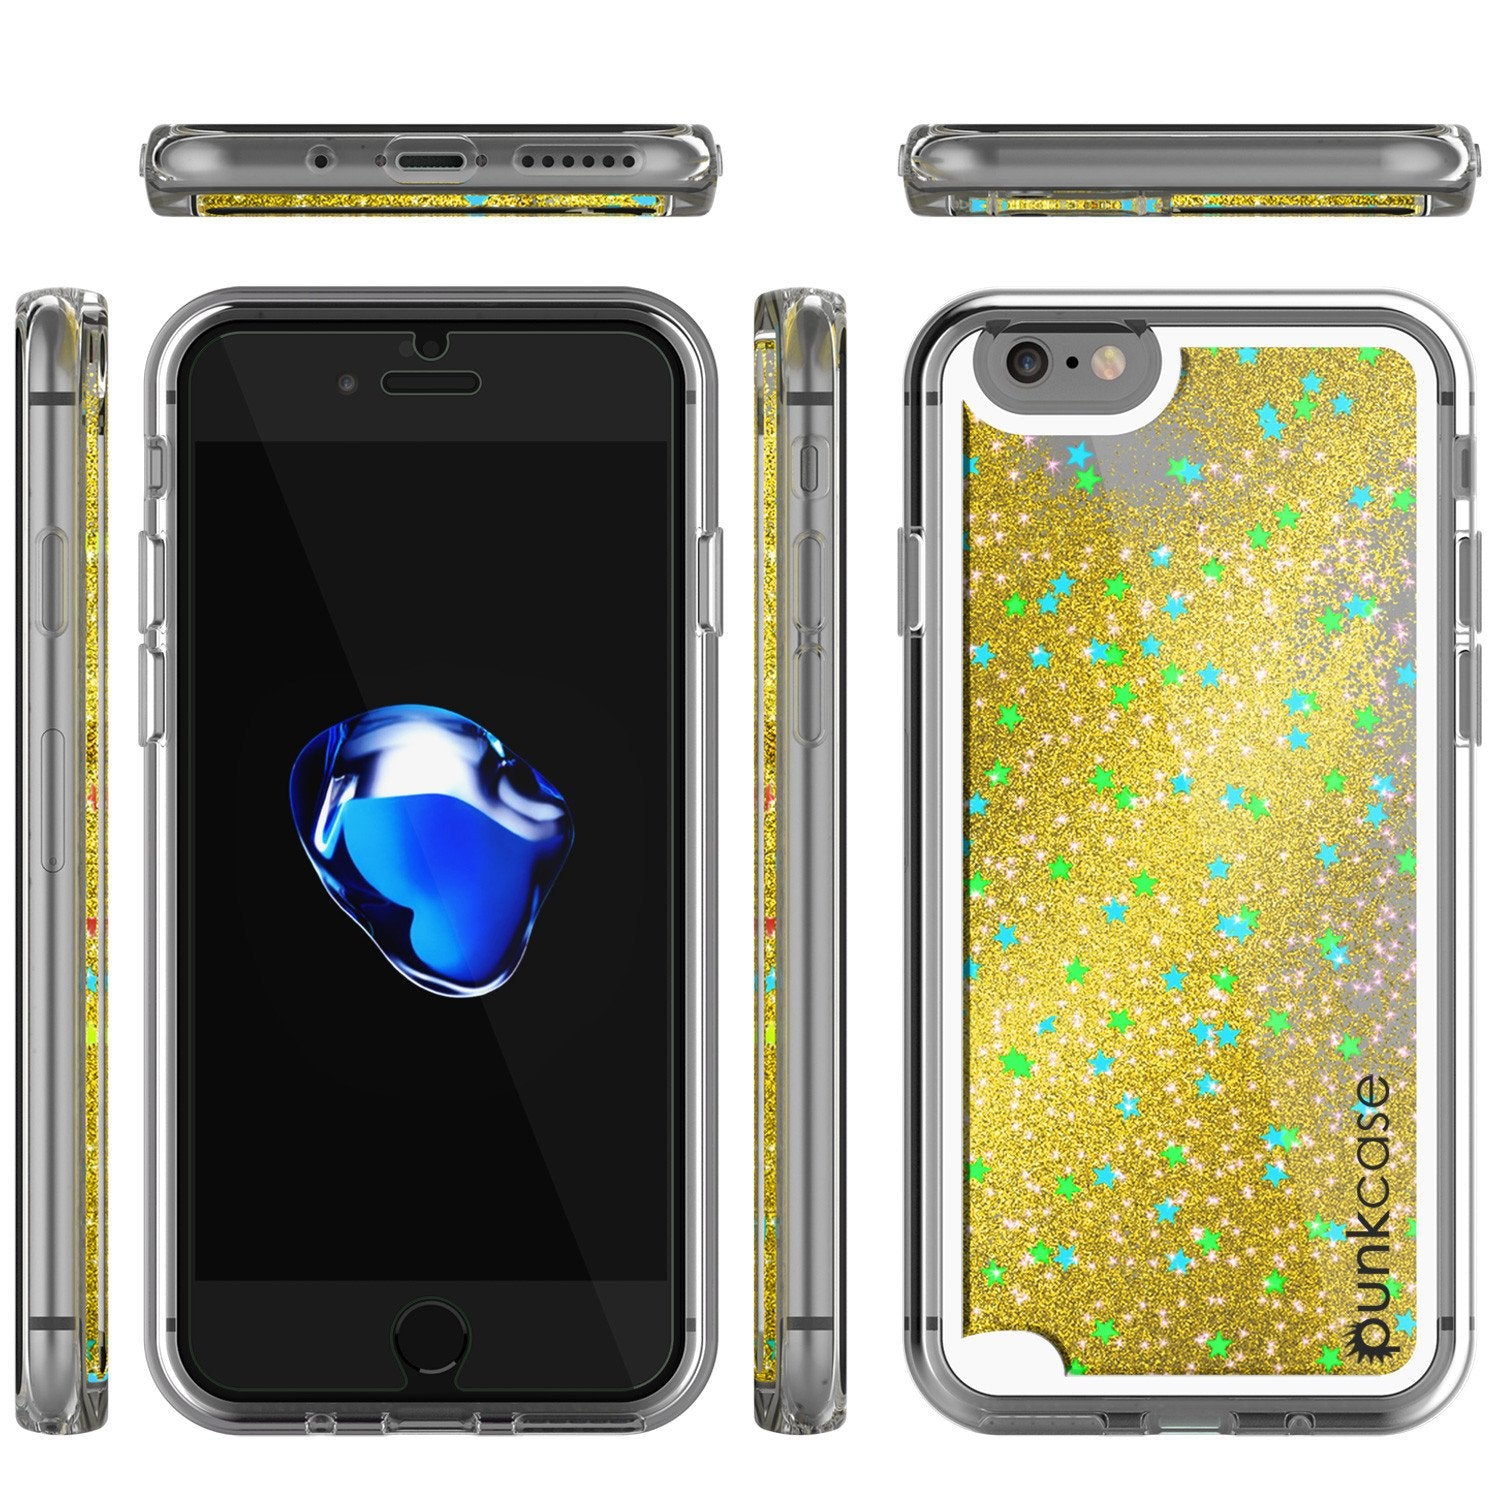 iPhone 7 Case, Punkcase [Liquid Gold Series] Protective Dual Layer Floating Glitter Cover with lots of Bling & Sparkle + 0.3mm Tempered Glass Screen Protector for Apple iPhone 7s